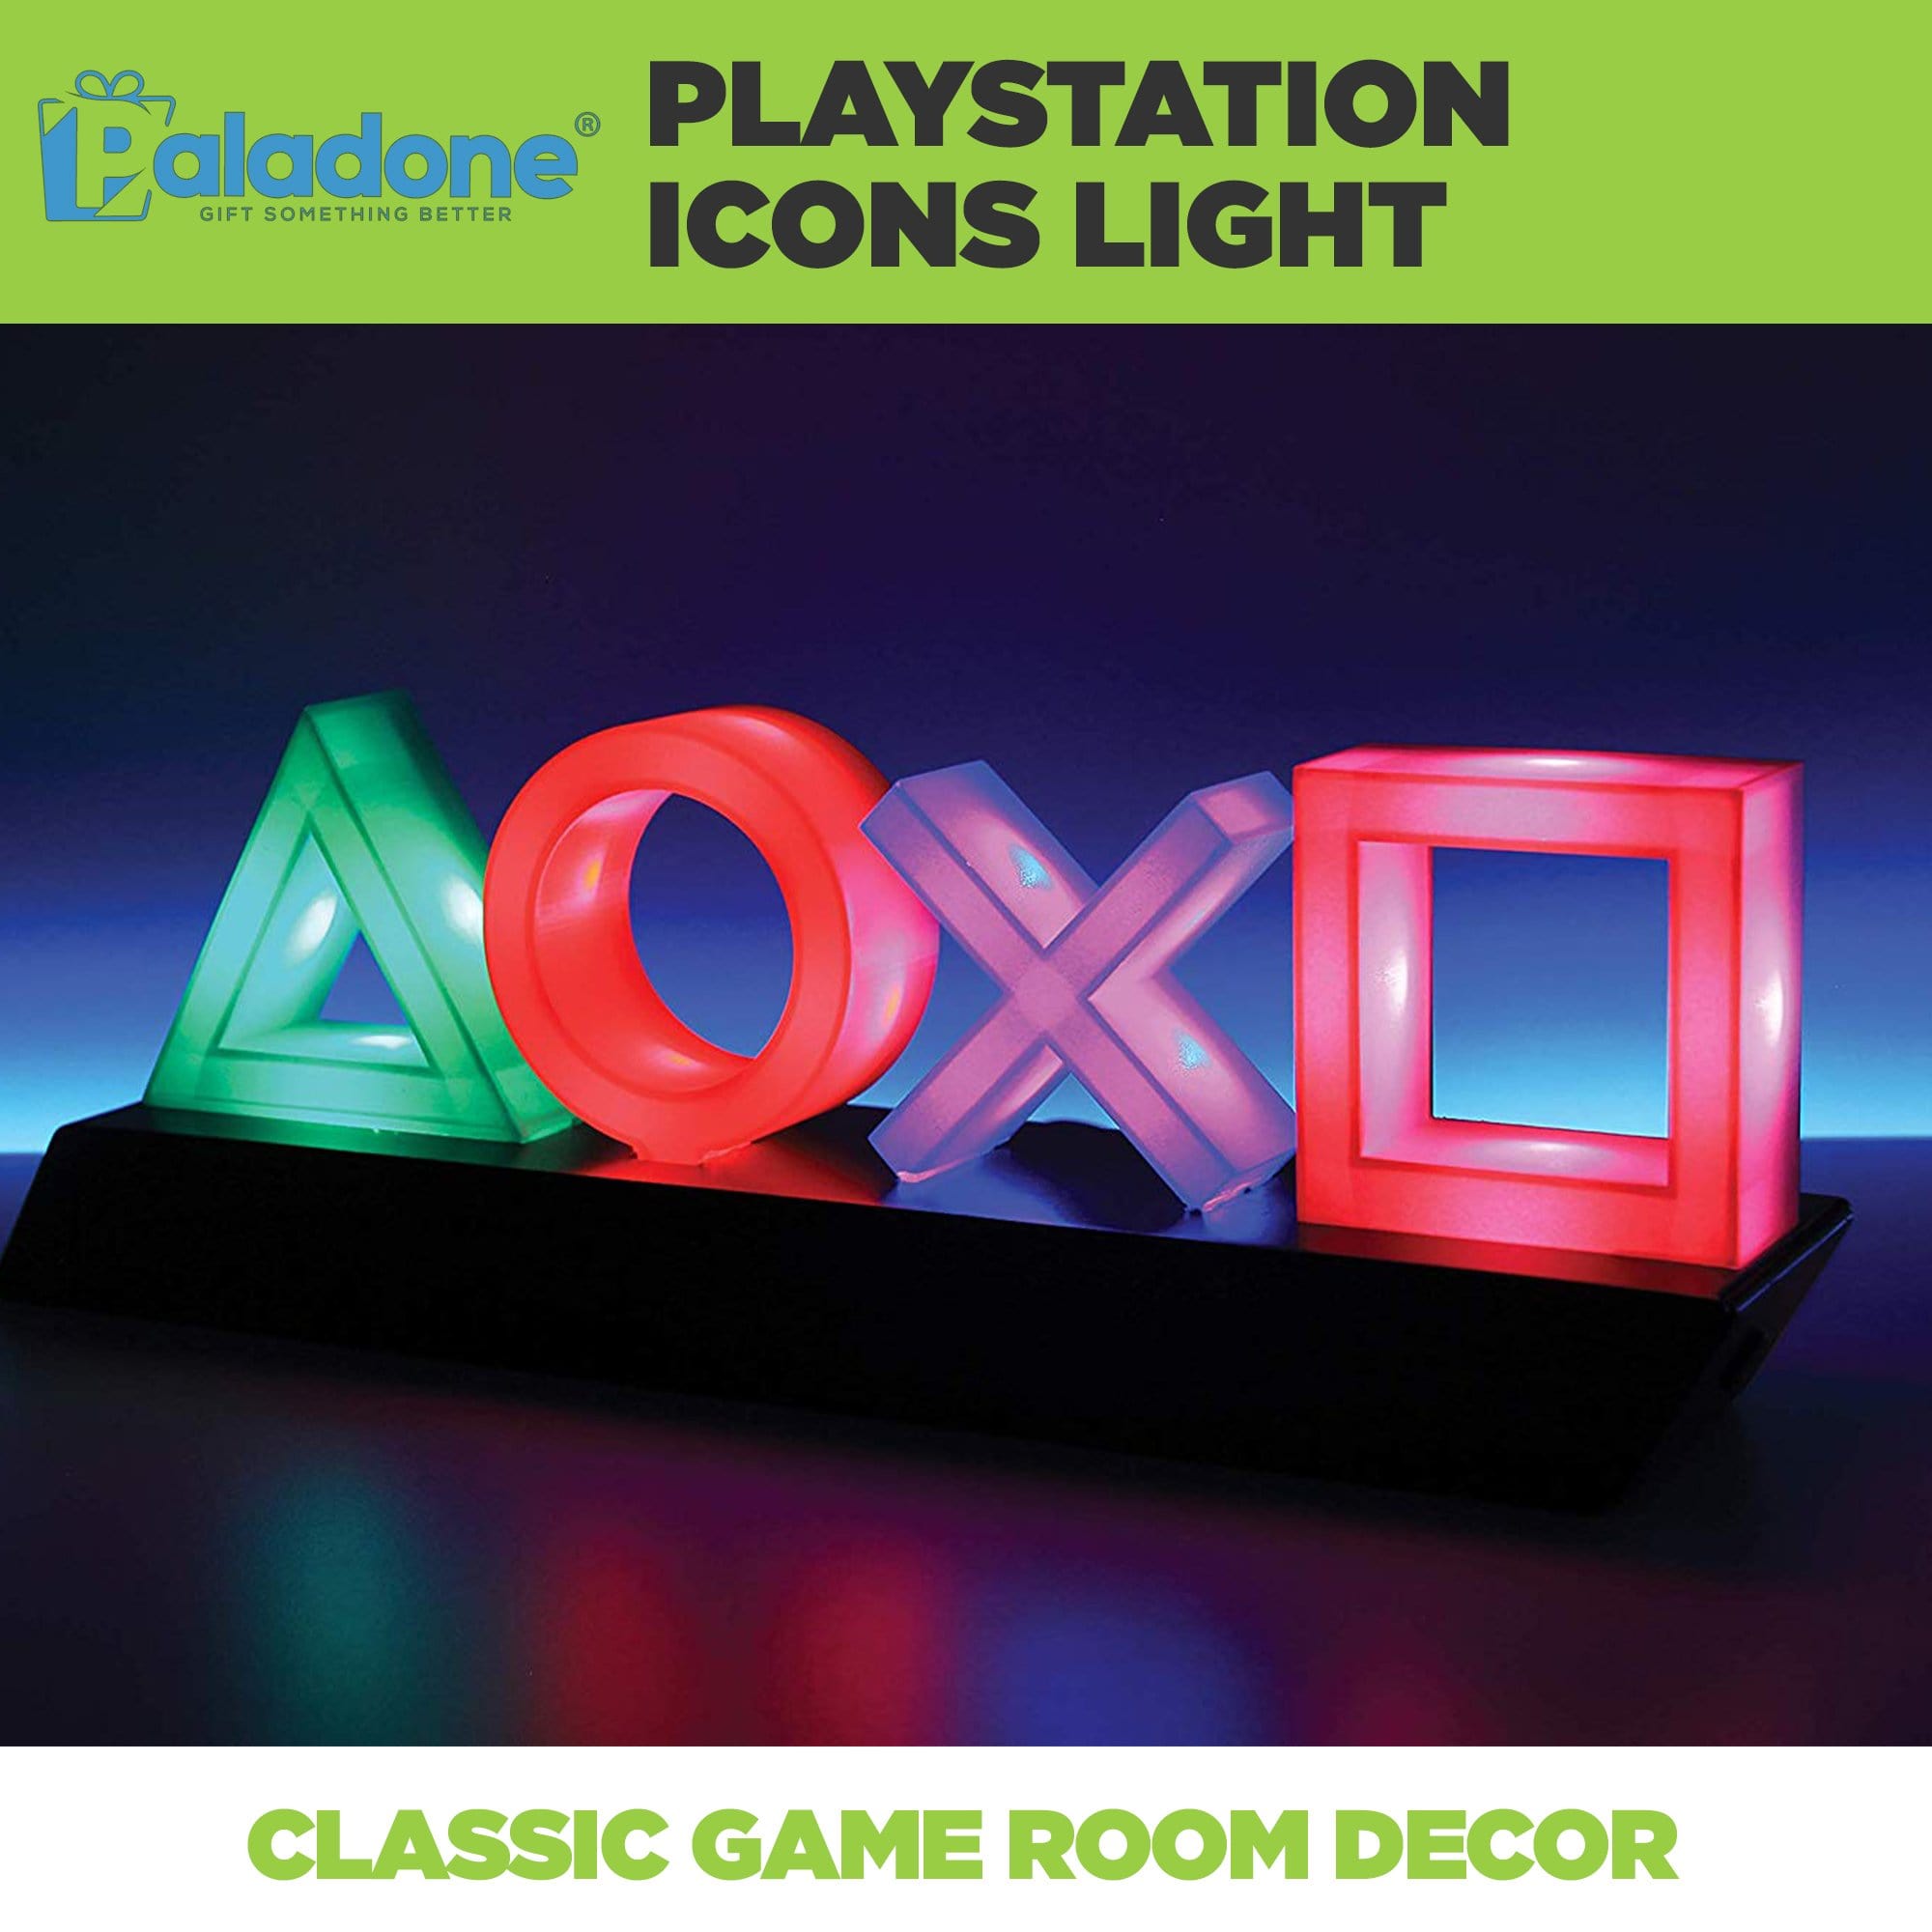 Paladone Playstation Icons light is the perfect game room decor! Features PS4 Icons.